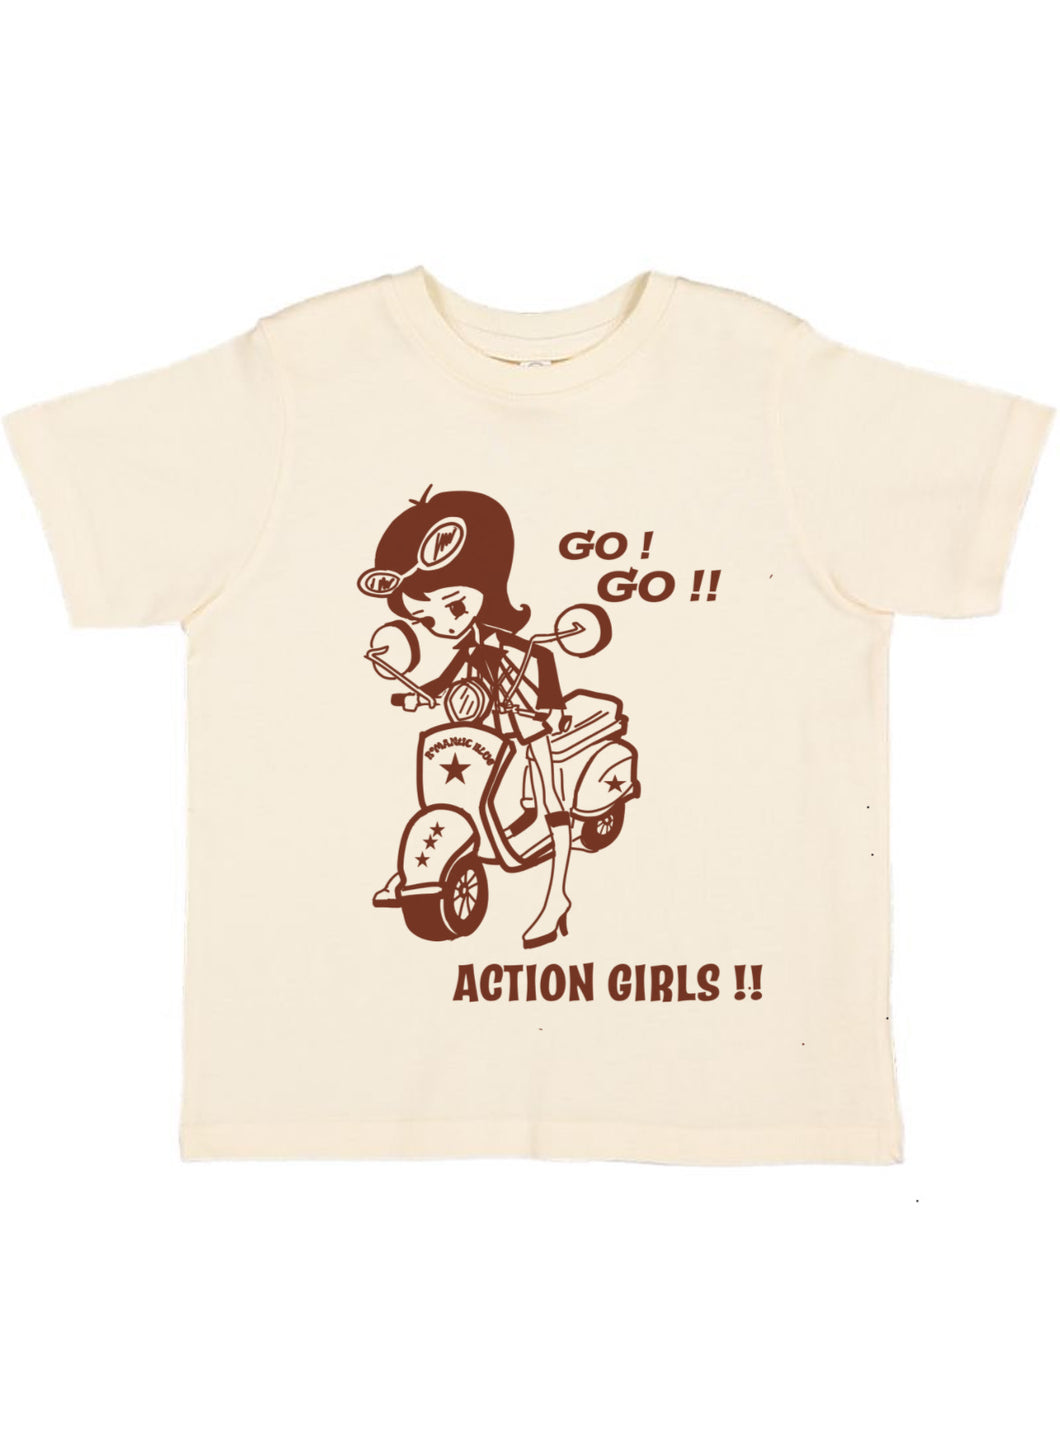 Action Girls - Brown